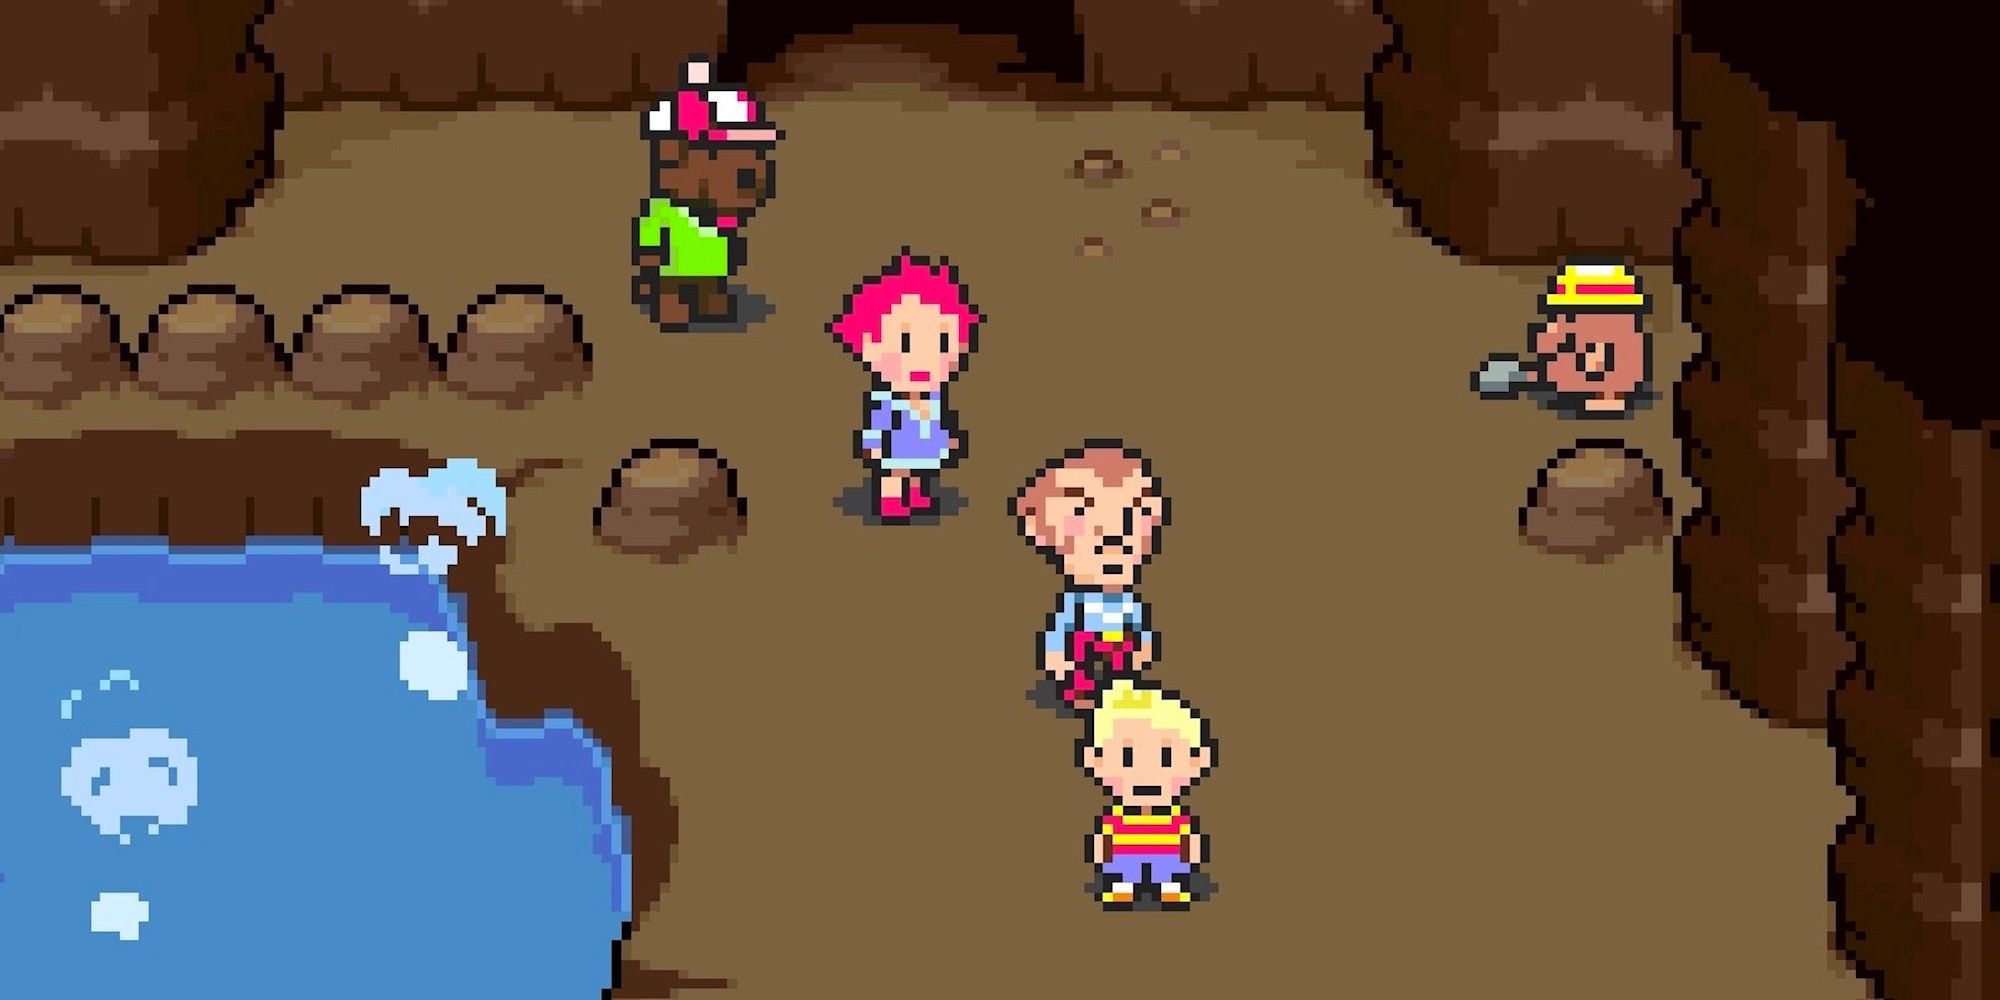 Exploring the world in Mother 3